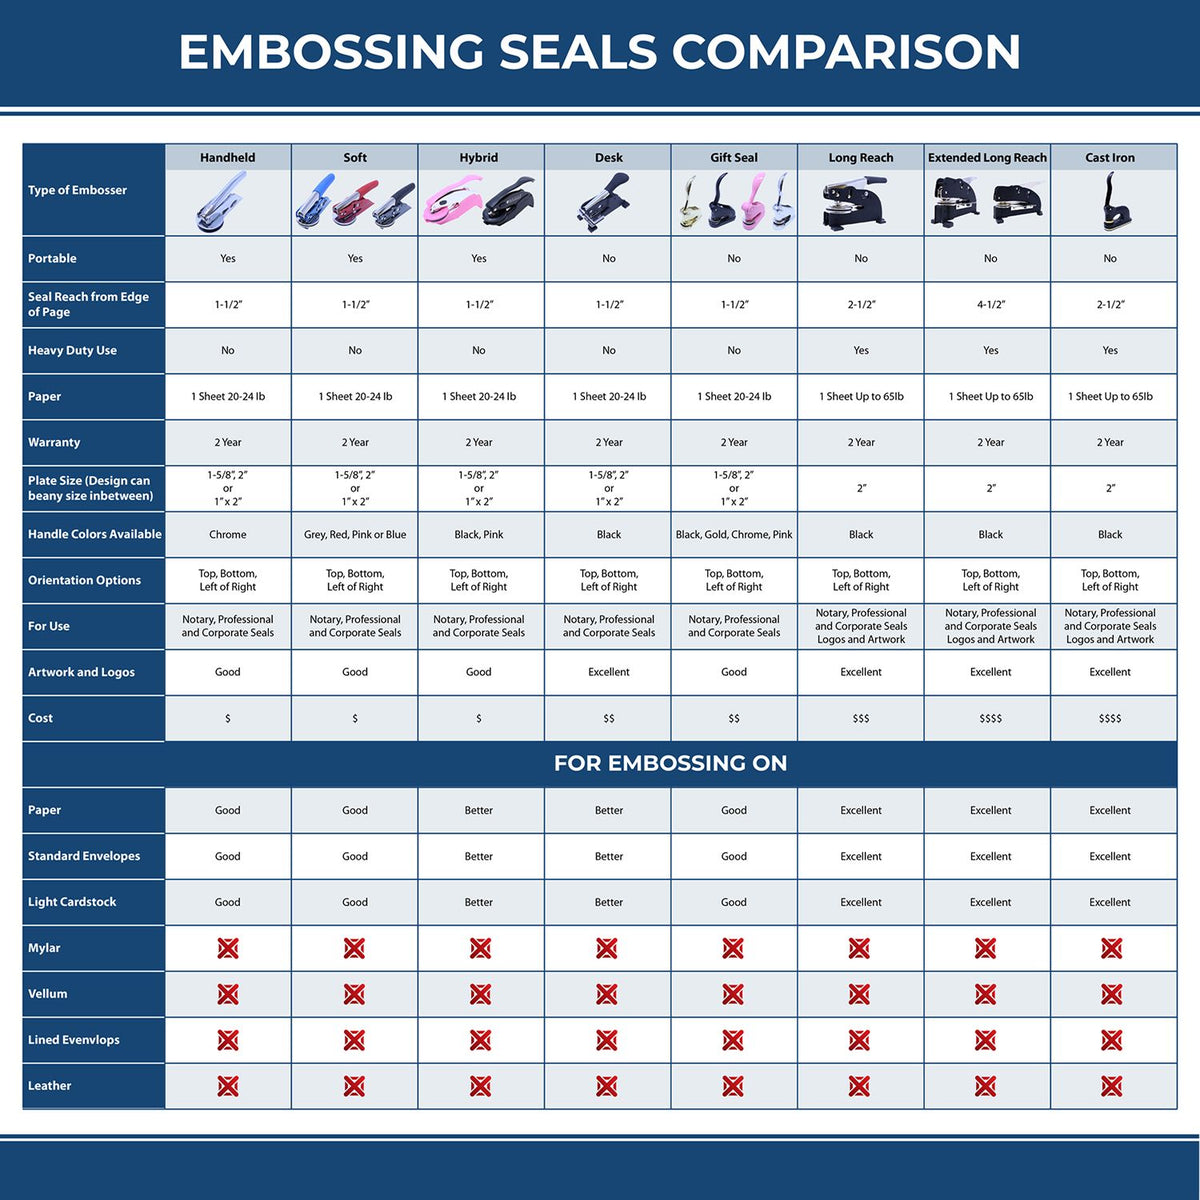 A comparison chart for the different types of mount models available for the Handheld Idaho Land Surveyor Seal.